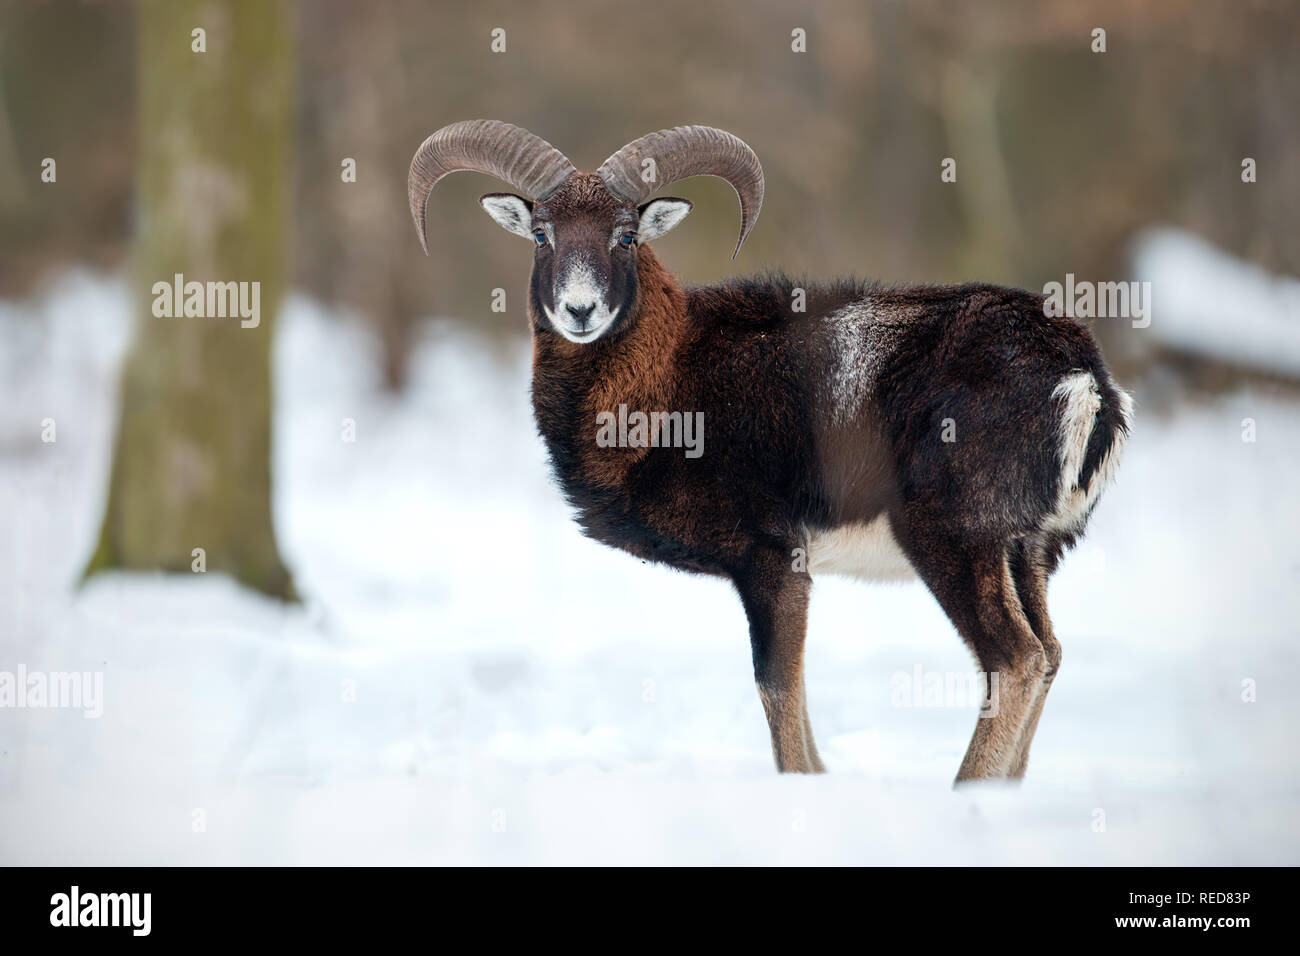 Wild sheep, mouflon, standing in deep snow in winter forest. Stock Photo